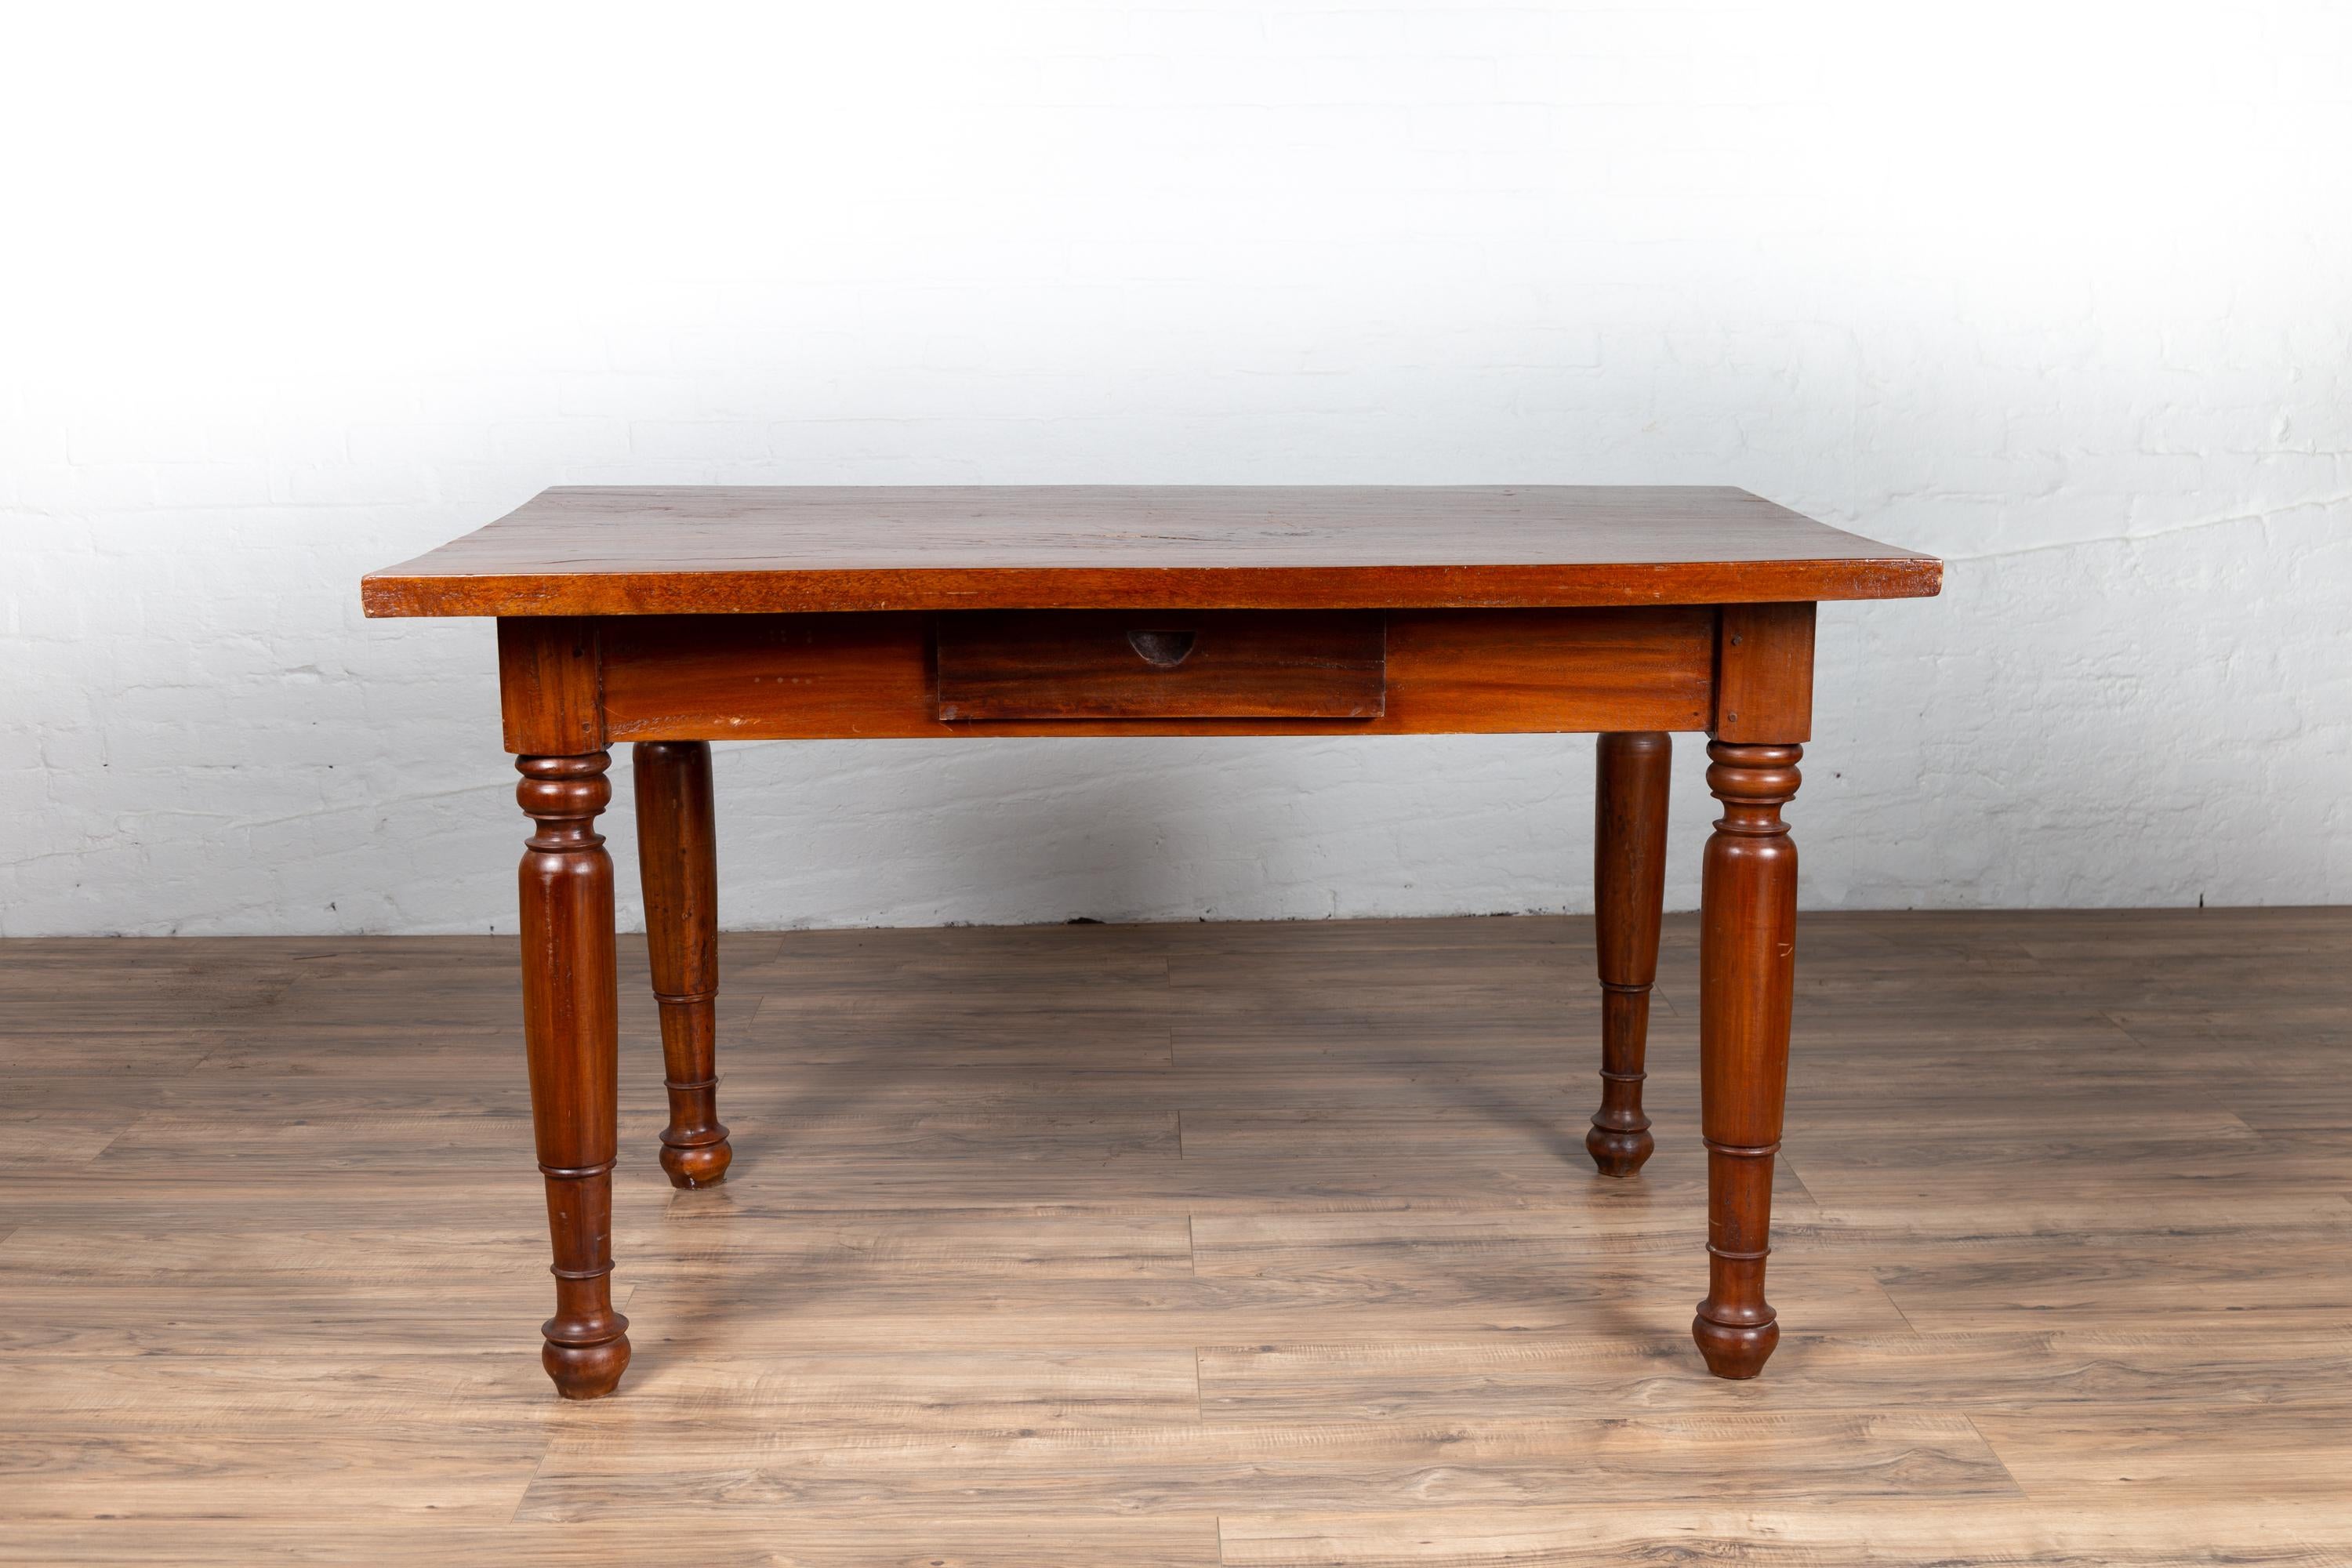 An antique Dutch Colonial Javanese teak desk from the early 20th century, with single drawer and turned legs. Born on the Island of Java in the early years of the 20th century, this Dutch Colonial desk features a rectangular top sitting above an